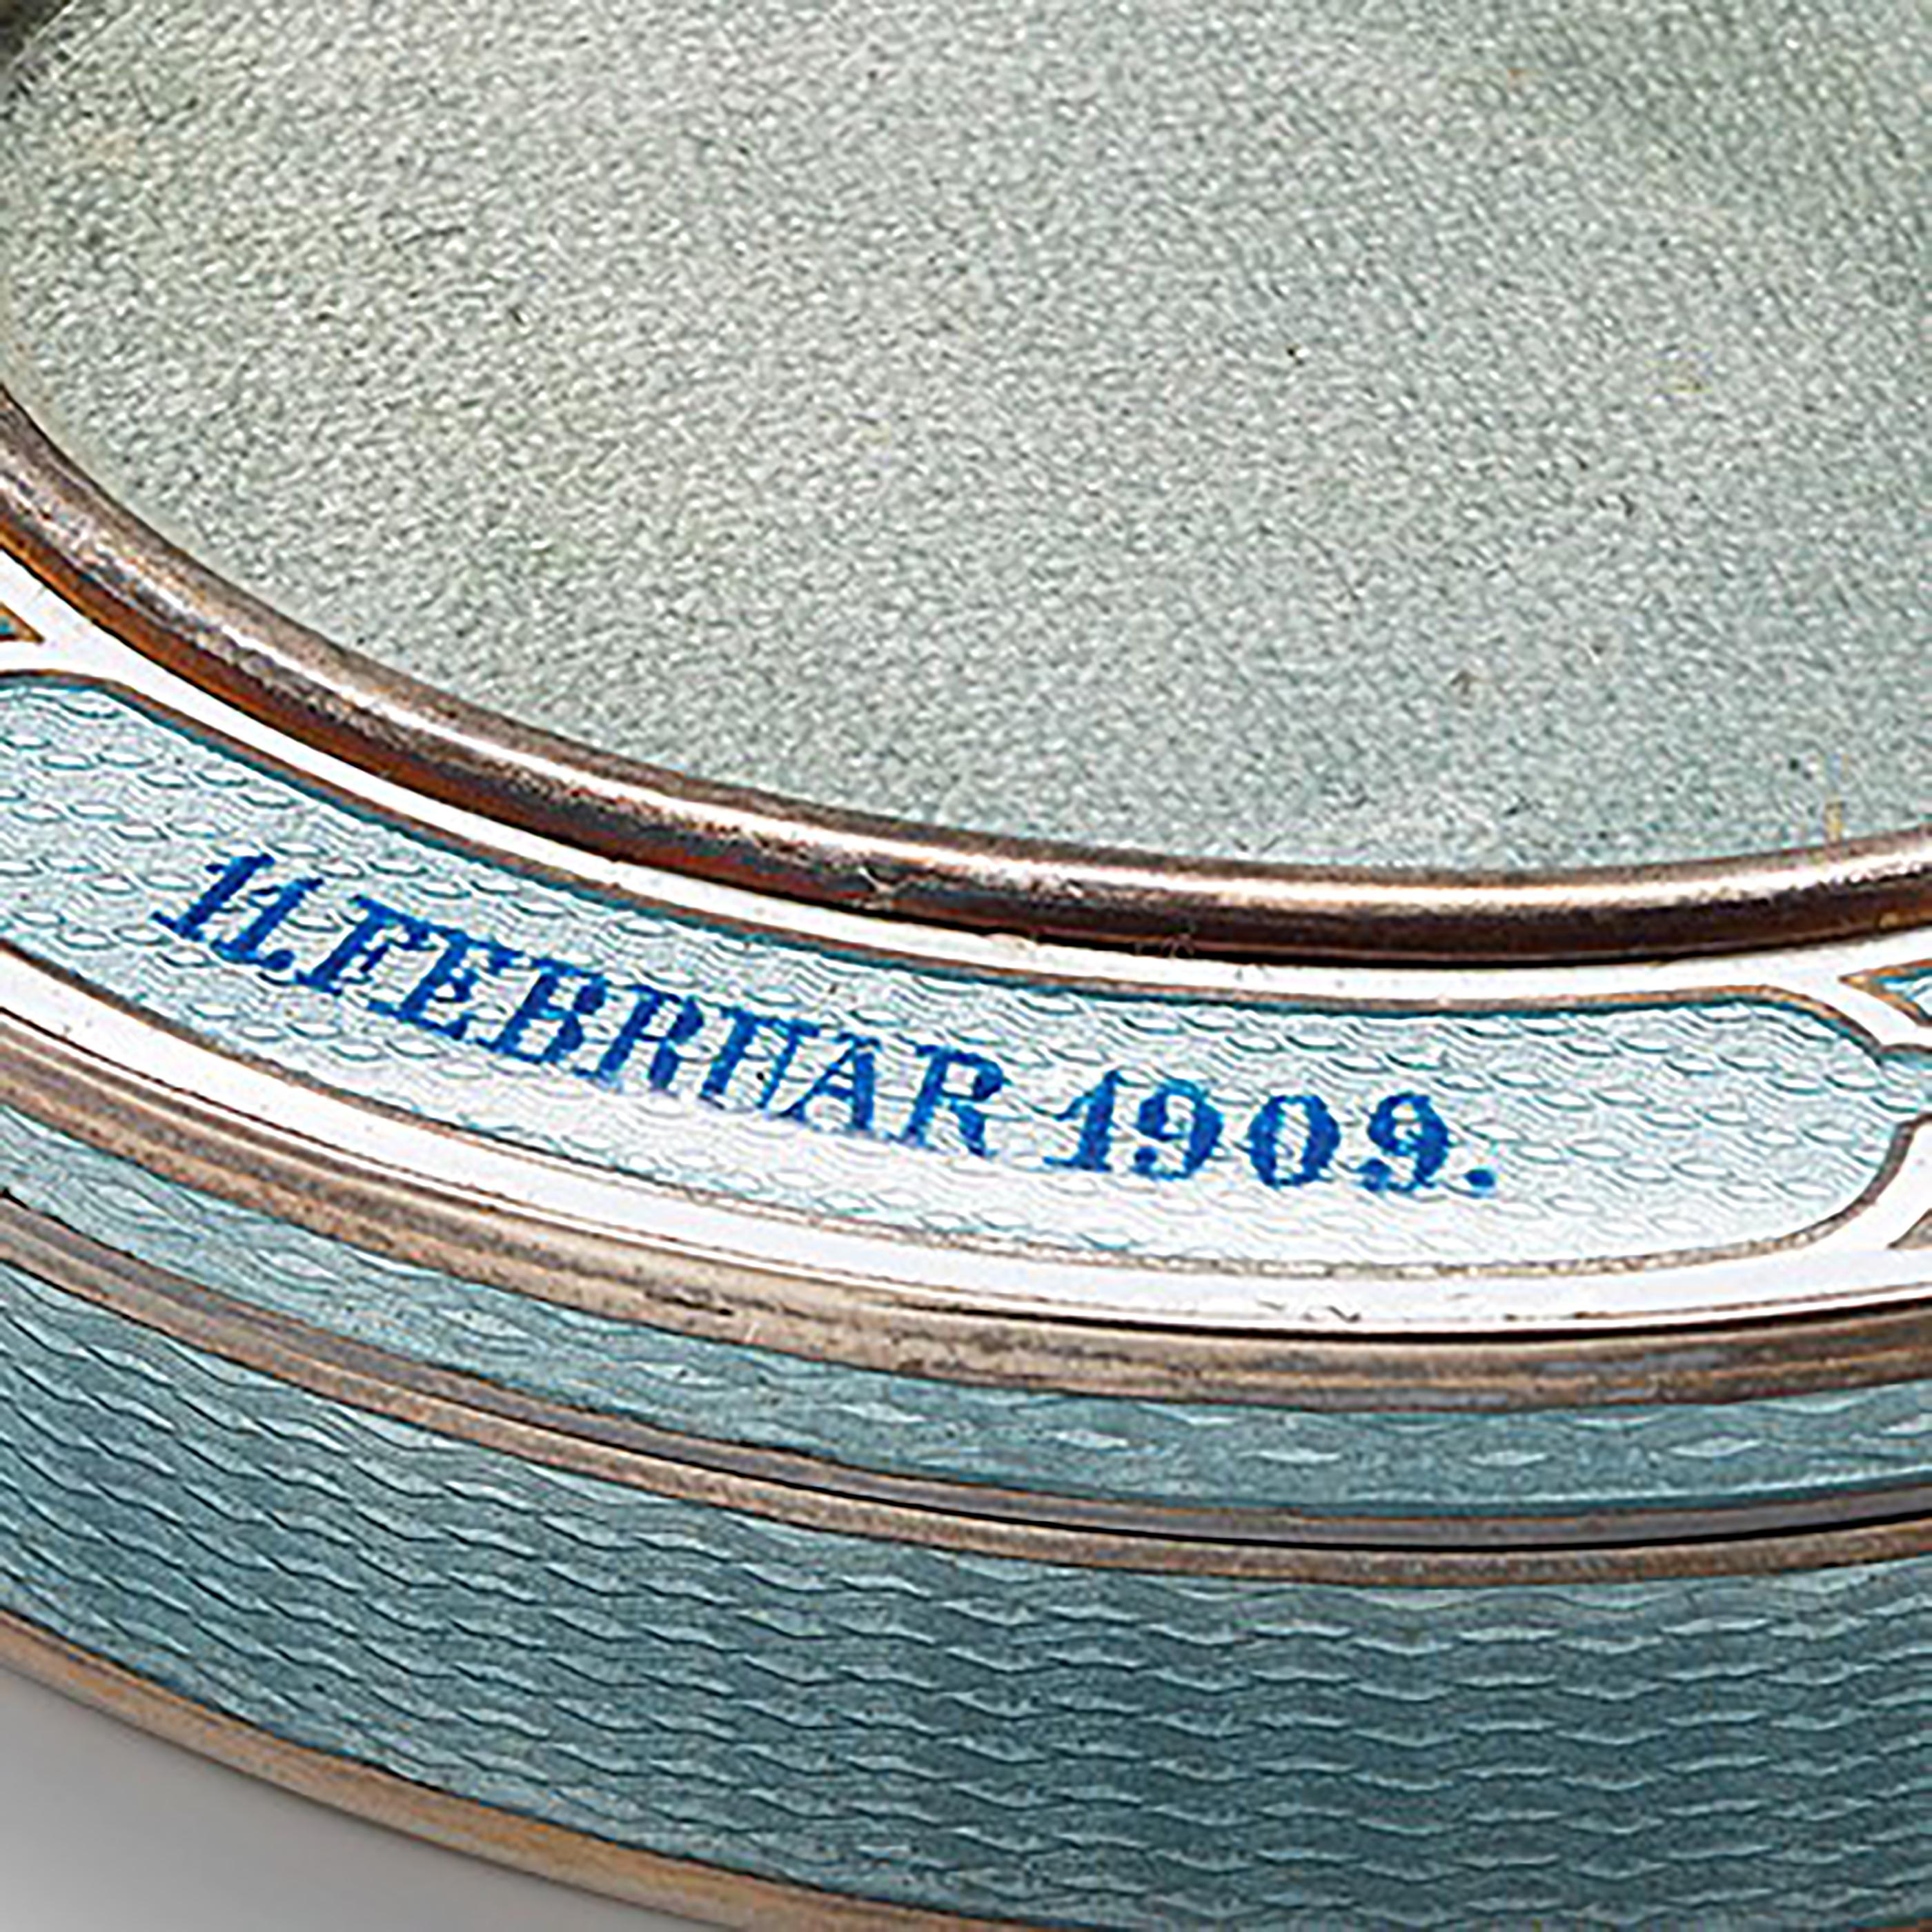 20th Century Vintage Silver and brass Blue/Baby Enamel Frame Insert Box
Made in Germany
Dated February 1909
Length: 3.25 inch
Width: 2.5 inch
Height: 0.75 inch

